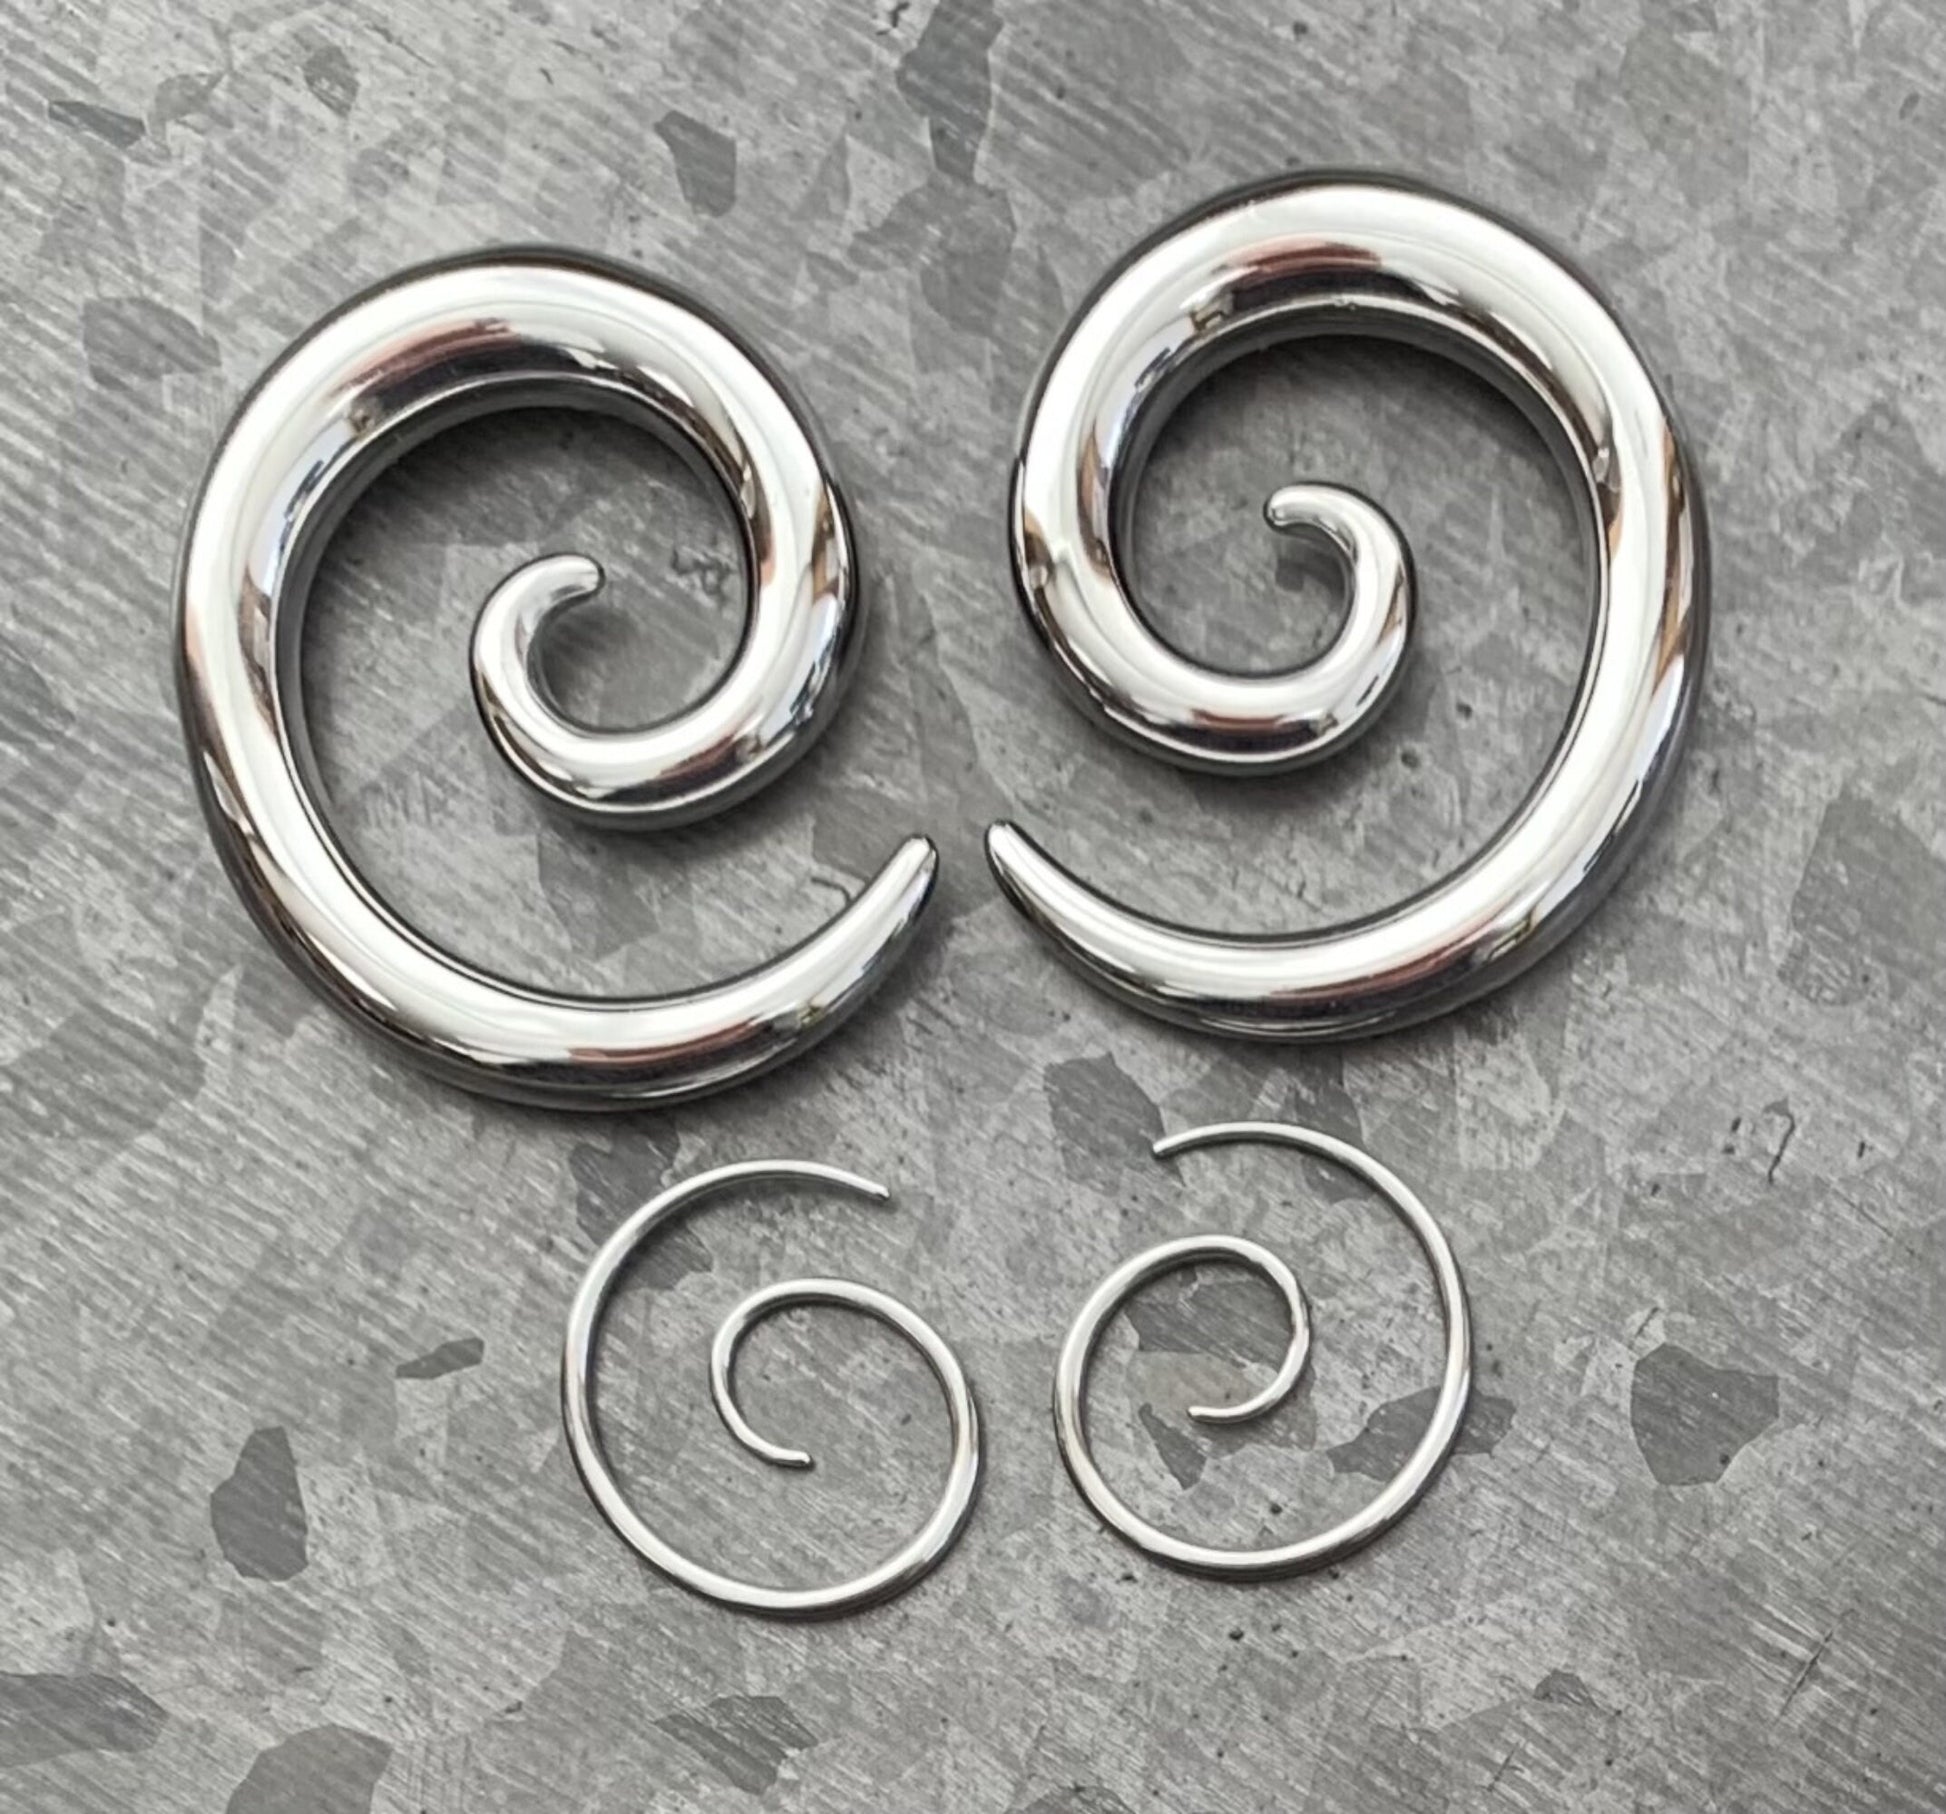 PAIR of Unique Stainless Steel Spiral Tapers Expanders - Gauges 14g thru 0g (8mm) available!